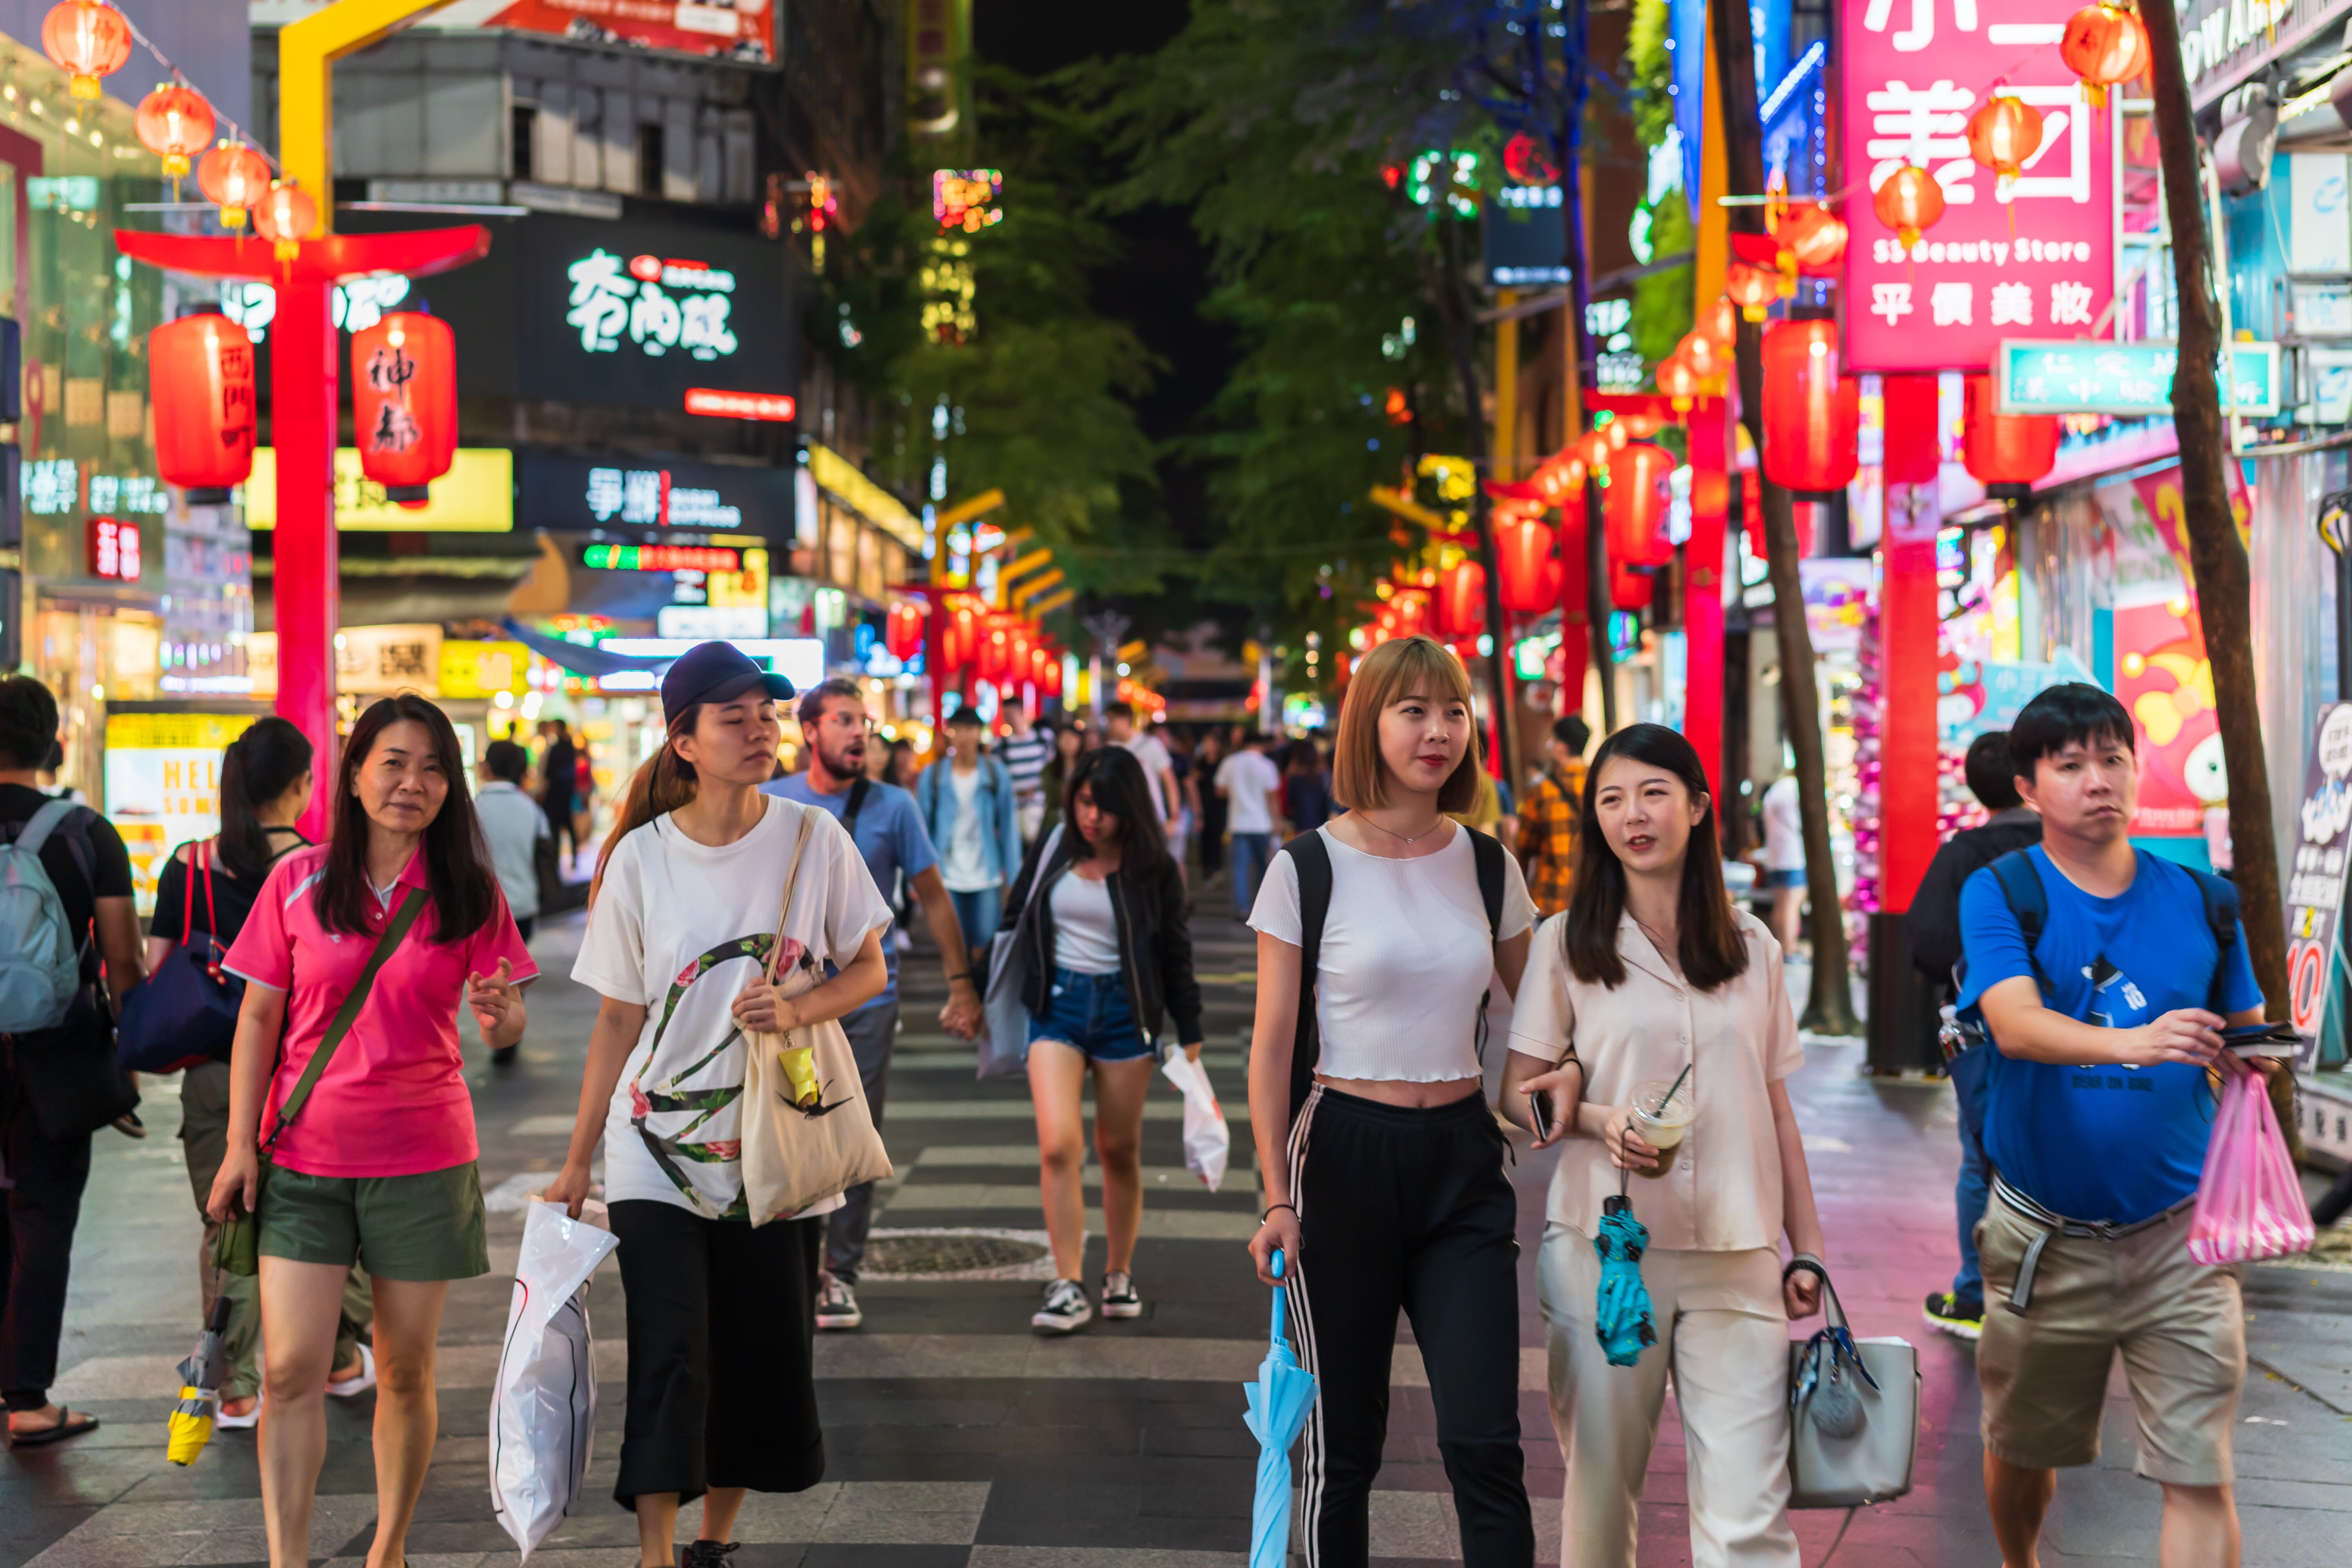 Taiwan has about 400,000 cases of hepatitis C, with nearly 7,000 new cases annually, but most of the people that are infected can be asymptomatic and unaware of their condition. Photo: BaLL LunLa/Shutterstock